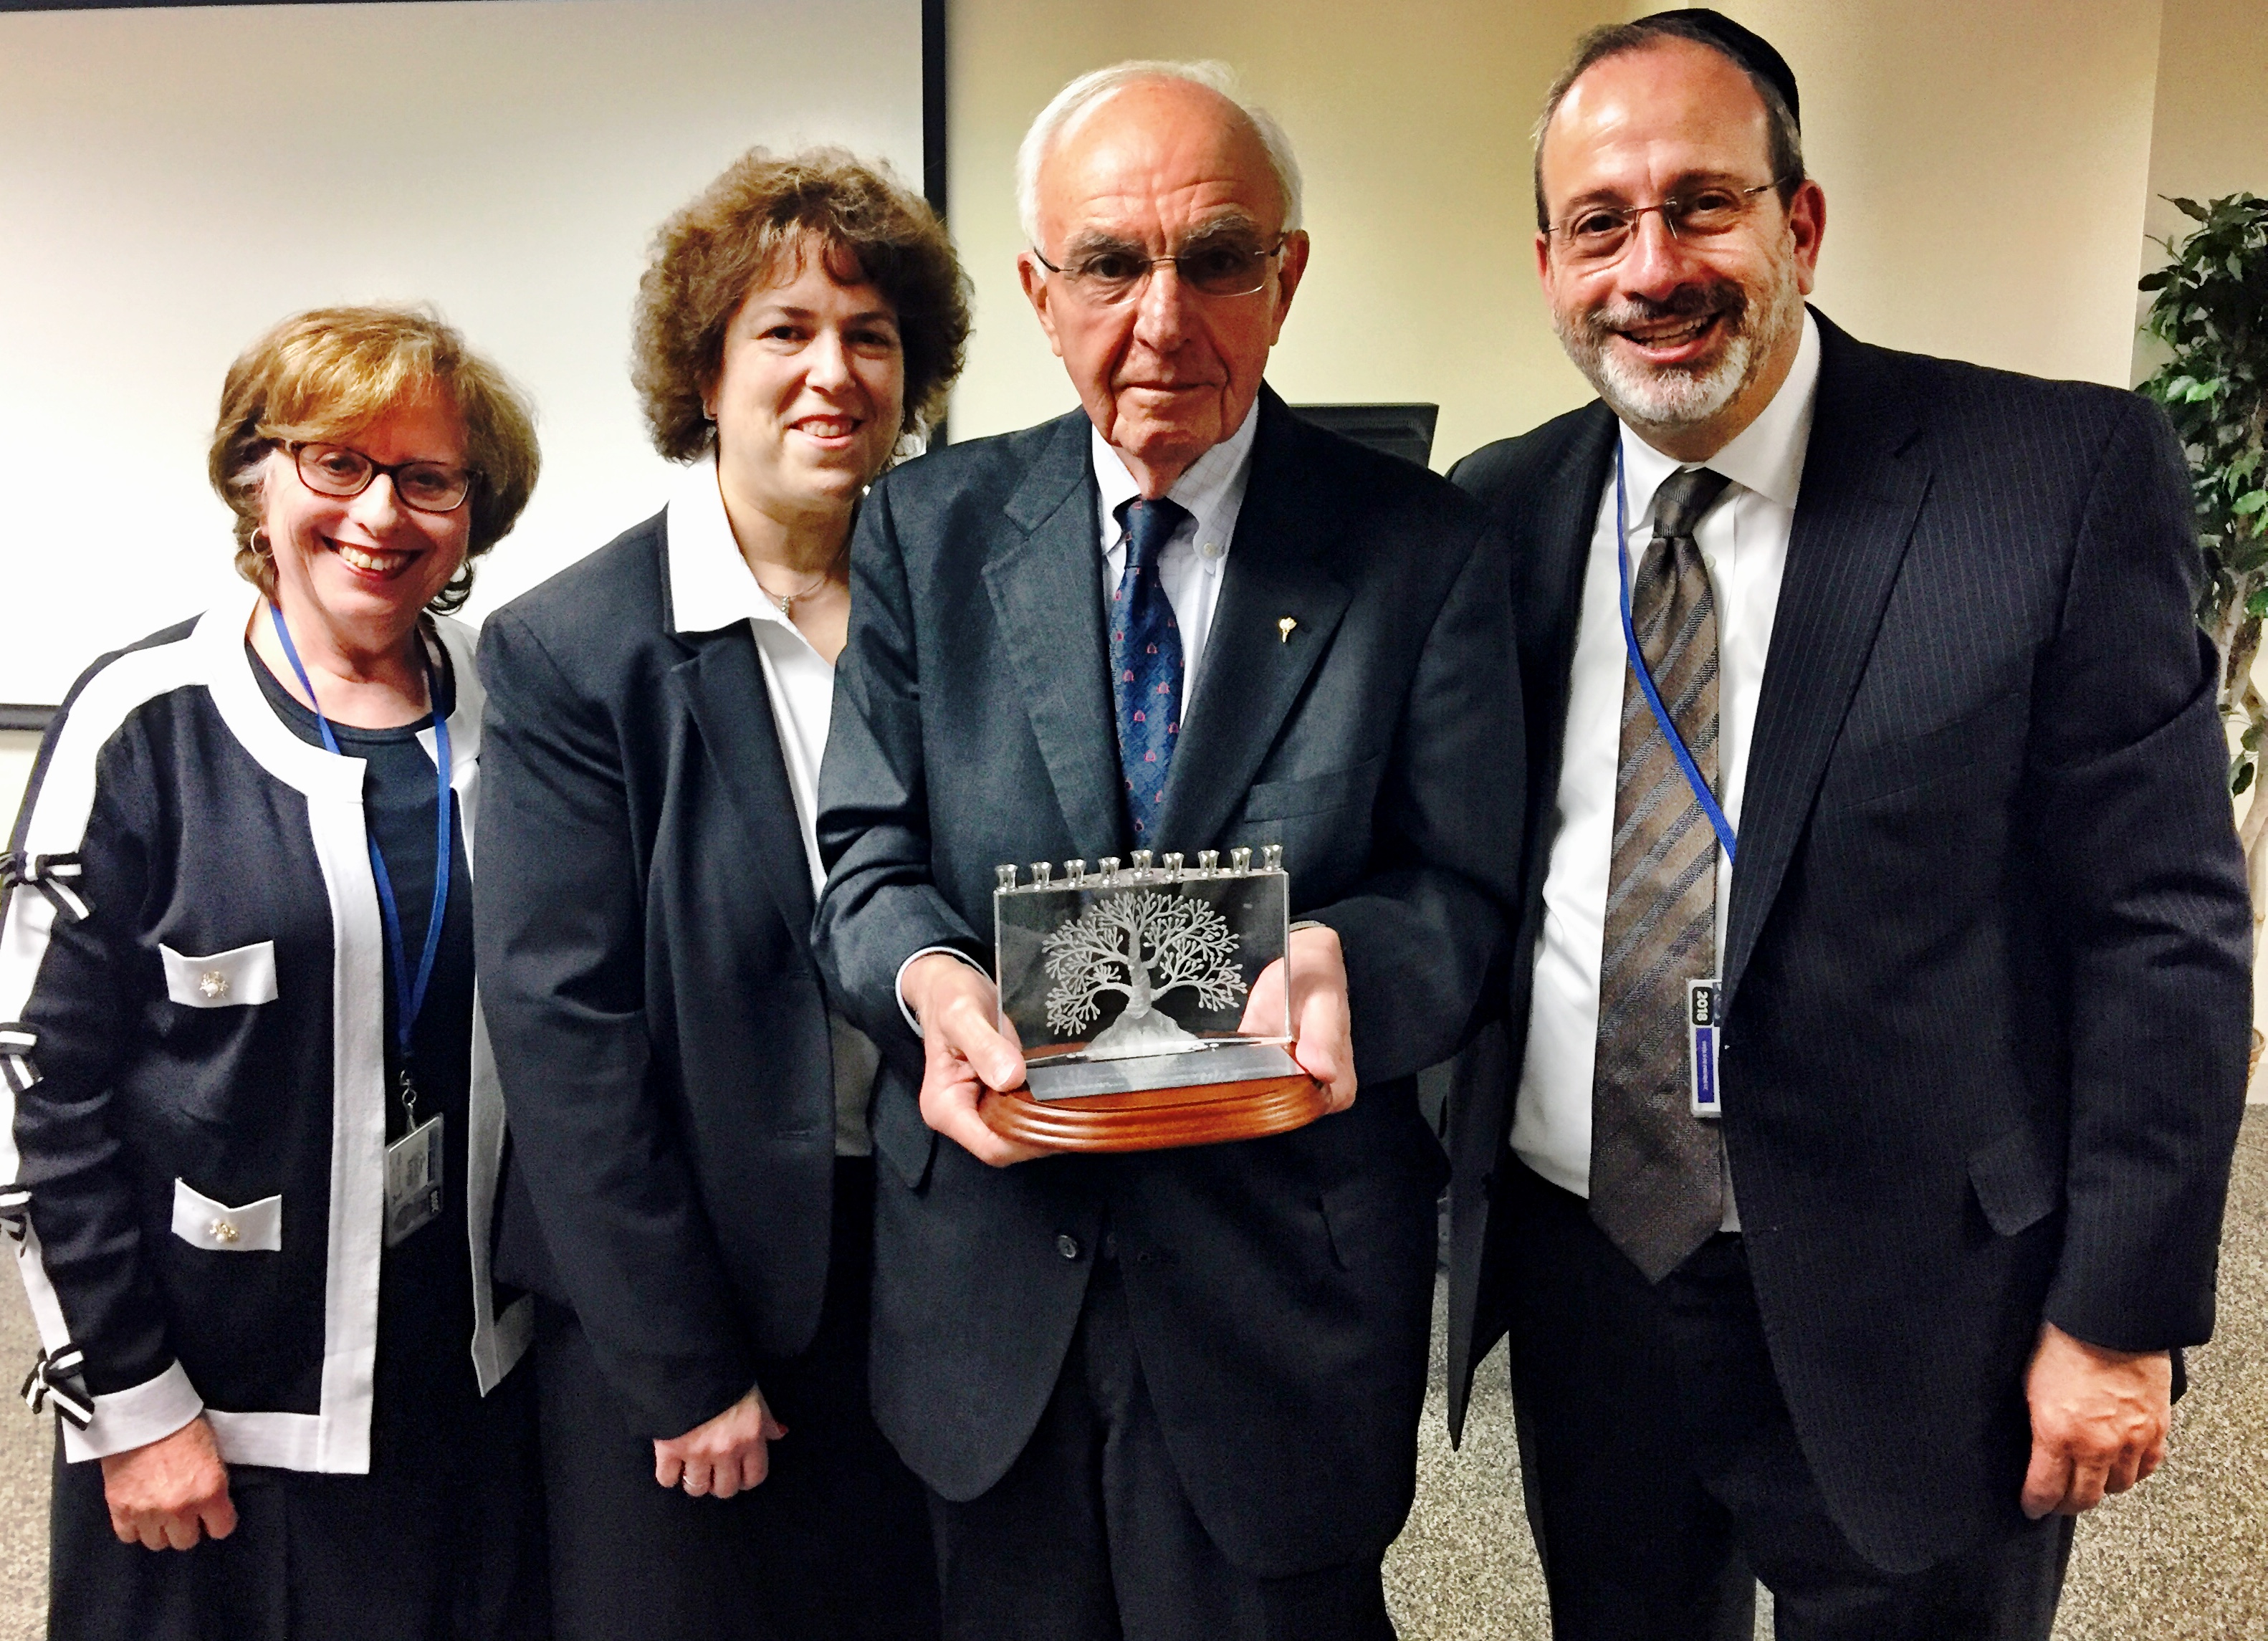 Dr. Arnold Spinner, presented with a gift on the occasion of his retirement. L-R: Nadja Graff, Ph.D., Vice President, Division of Graduate Studies, Patty Salkin, JD, Provost, Graduate & Professional Divisions, Dean Arnold Spinner, and Rabbi Moshe Krupka, Executive Vice President 